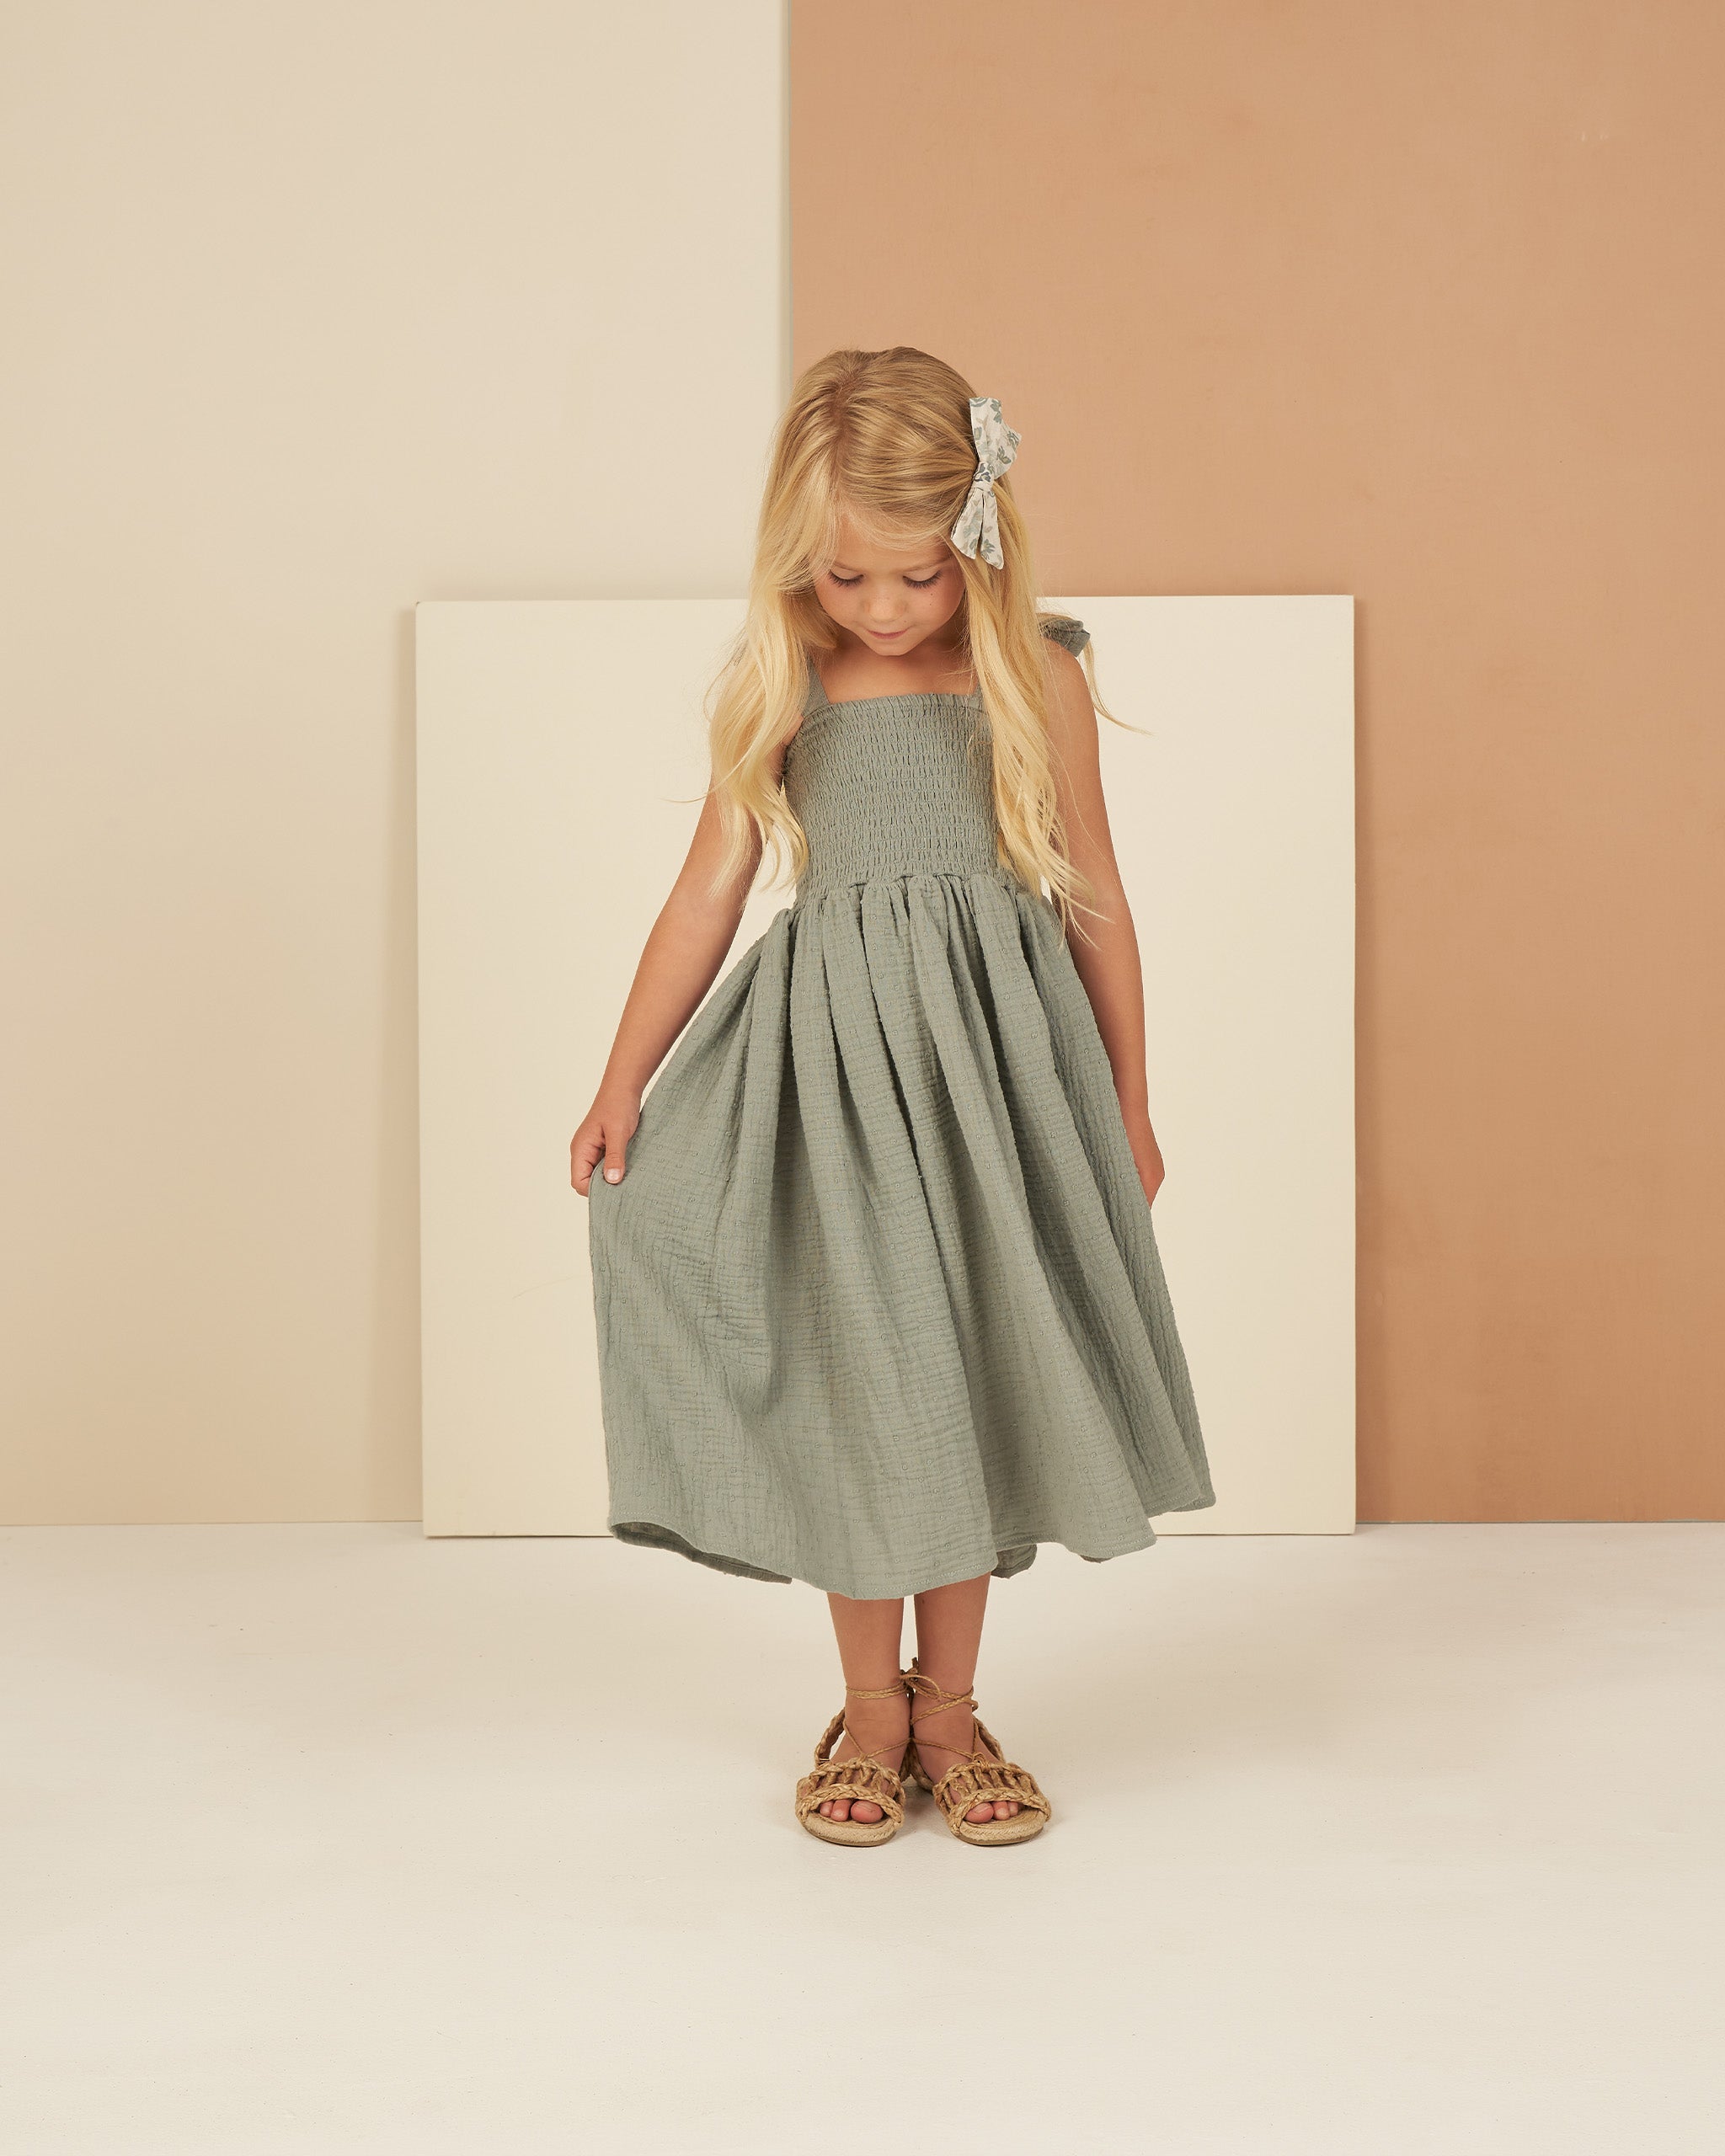 Ivy Dress || Aqua - Rylee + Cru | Kids Clothes | Trendy Baby Clothes | Modern Infant Outfits |